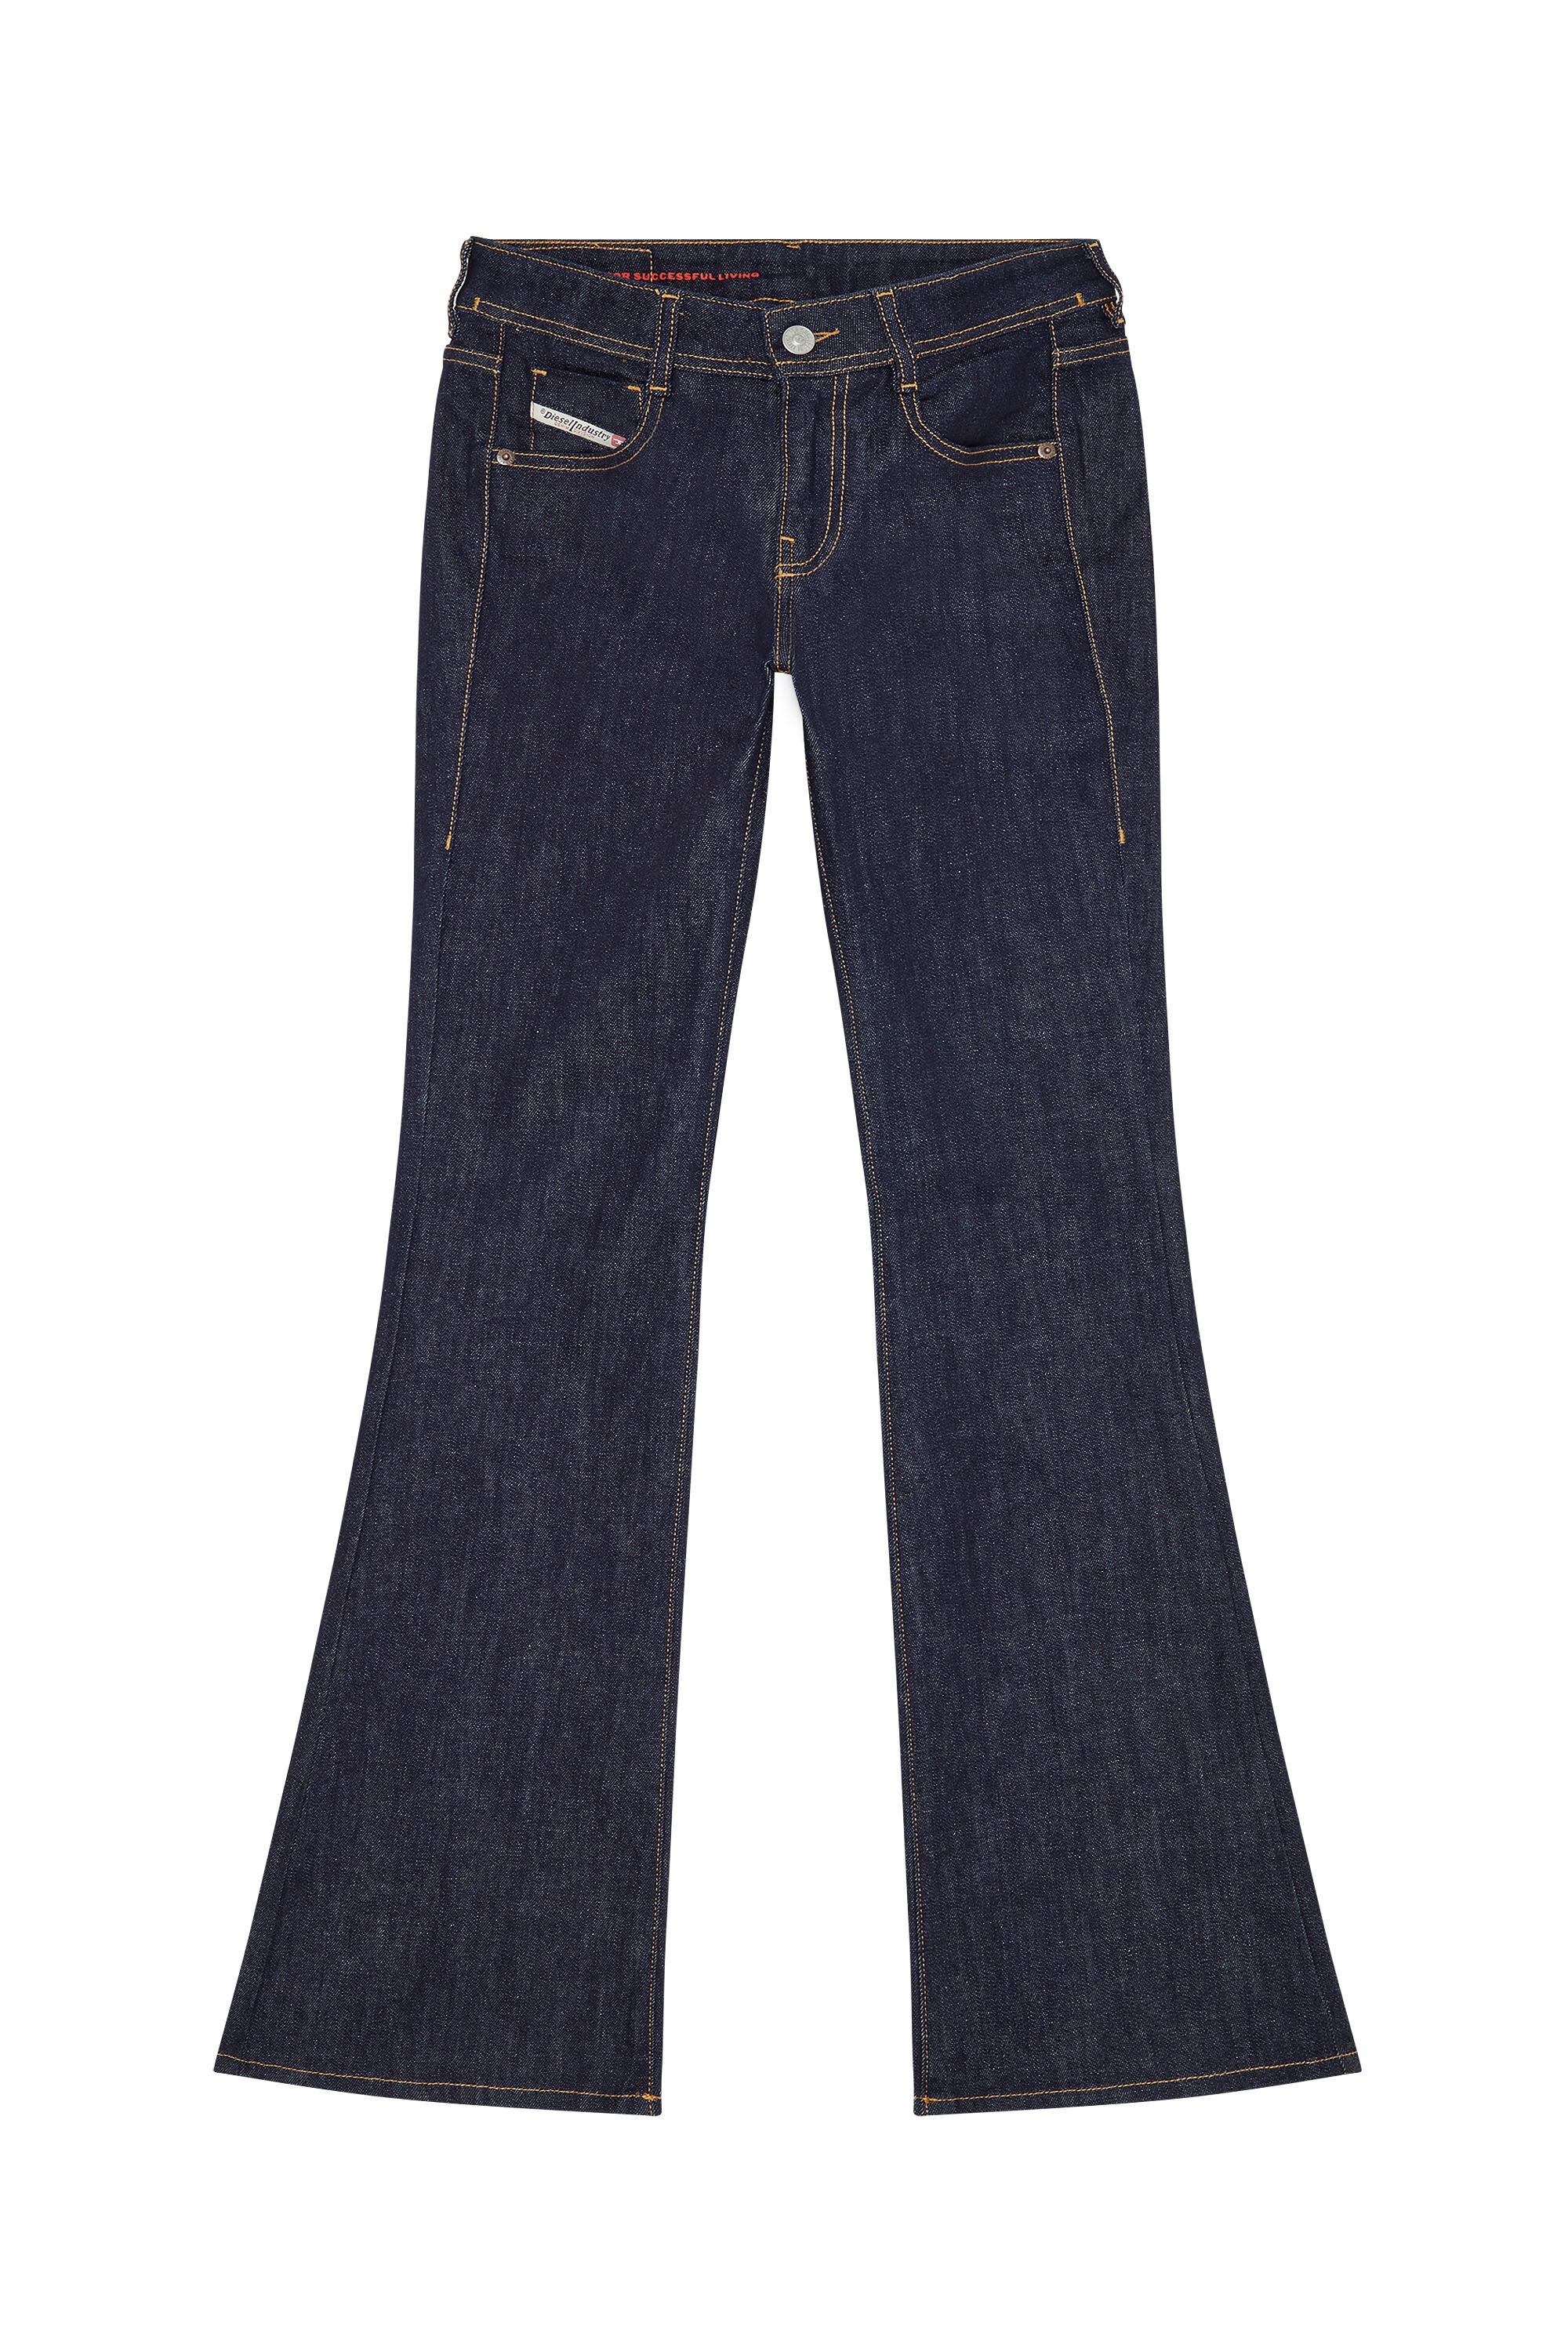 BOOTCUT AND FLARE JEANS 1969 D-EBBEY Z9B89 - 1